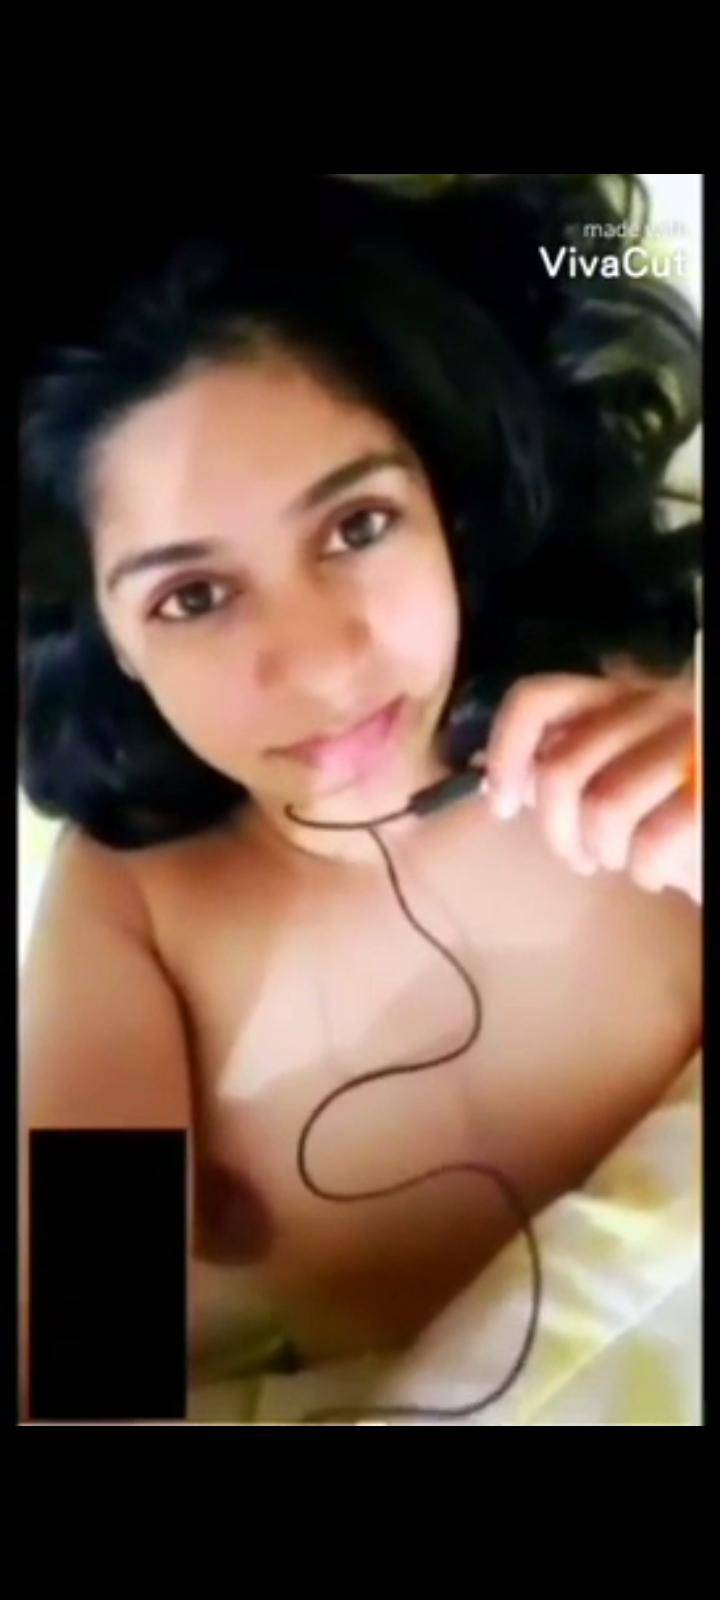 Super Cute Desi Gf Likes To Record Herself For Her Bf Lying Fully Naked